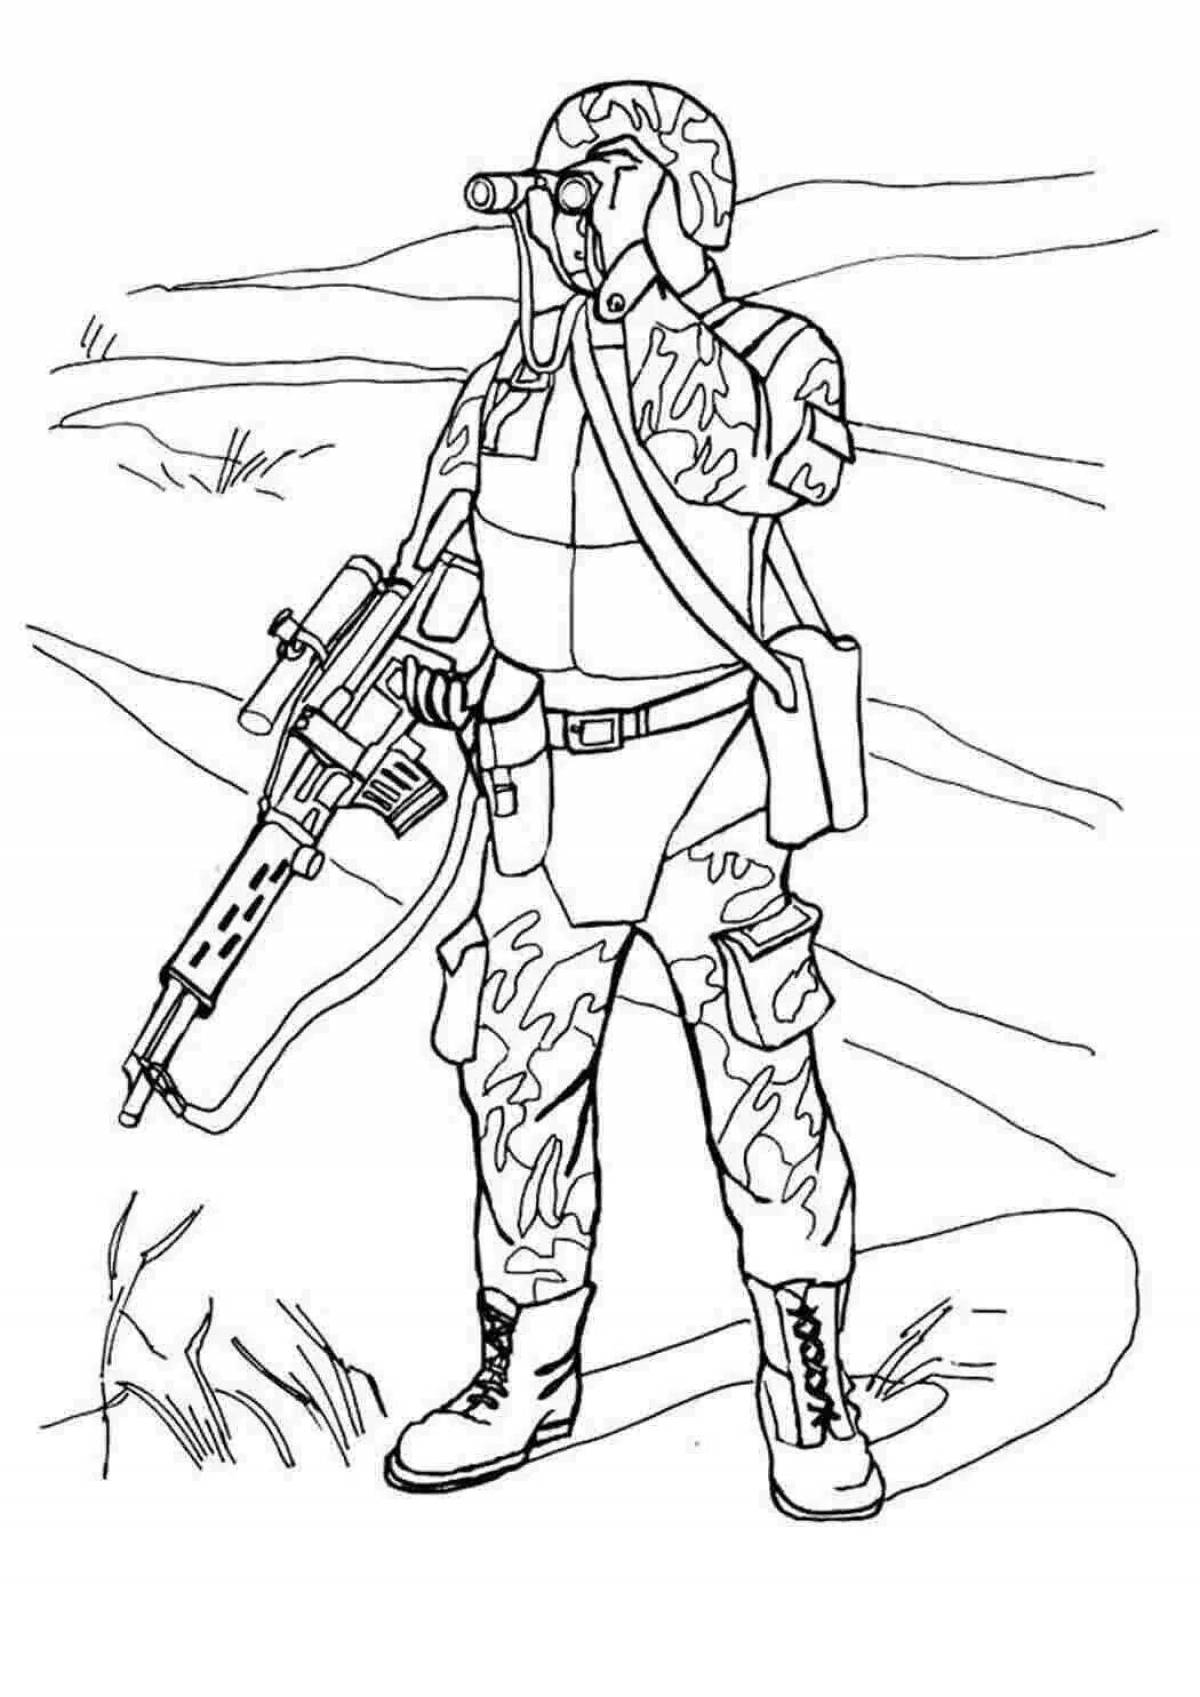 Fun coloring for infantry for students